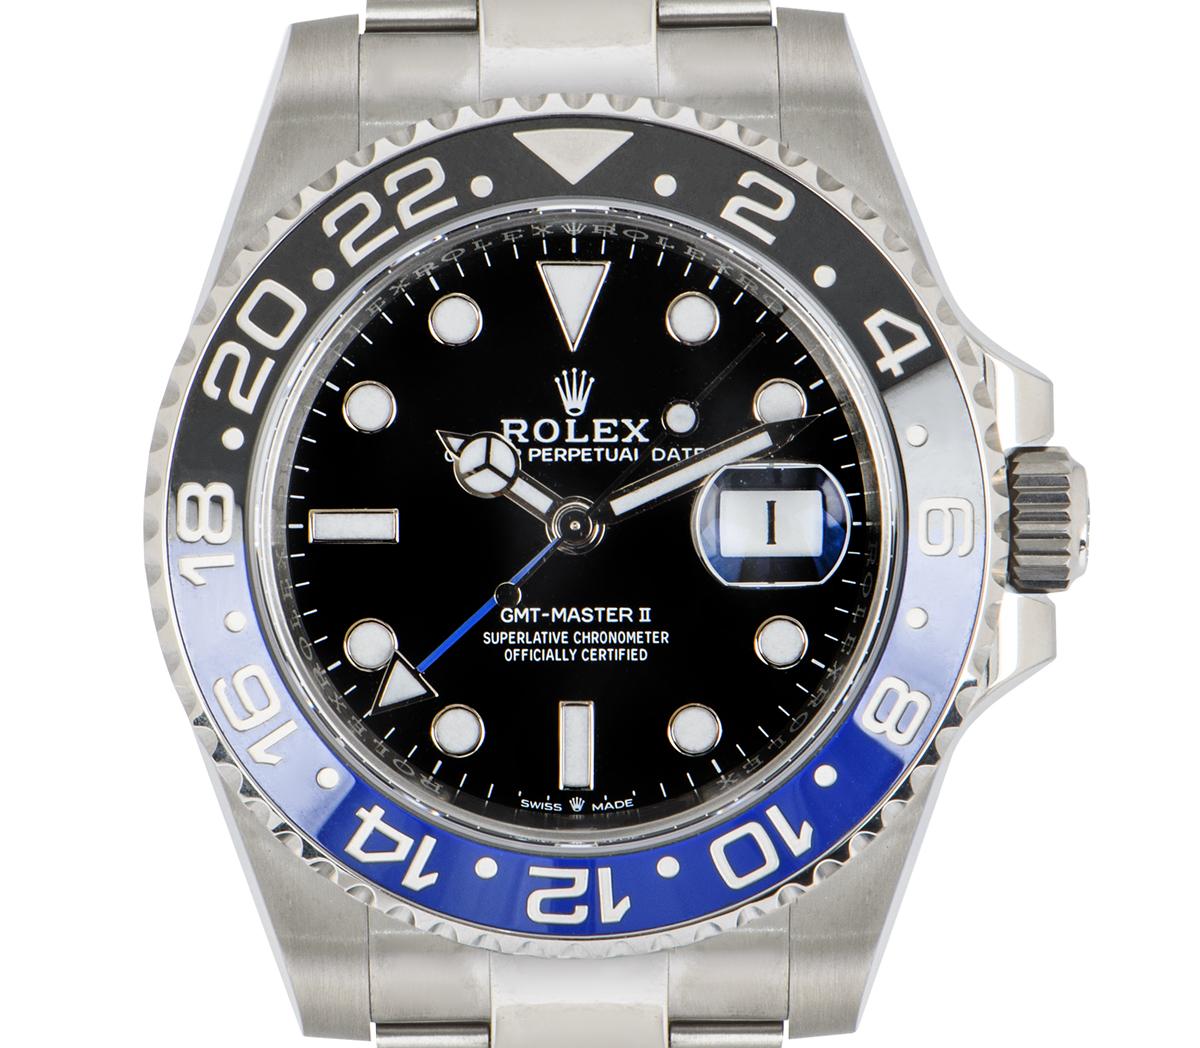 An unworn GMT-Master II Batman in Oystersteel from Rolex. Featuring a black dial with a blue time zone hand and date display. The ceramic black and blue bidirectional rotatable bezel features a graduated 24-hour display.

The 126710BLNR was newly